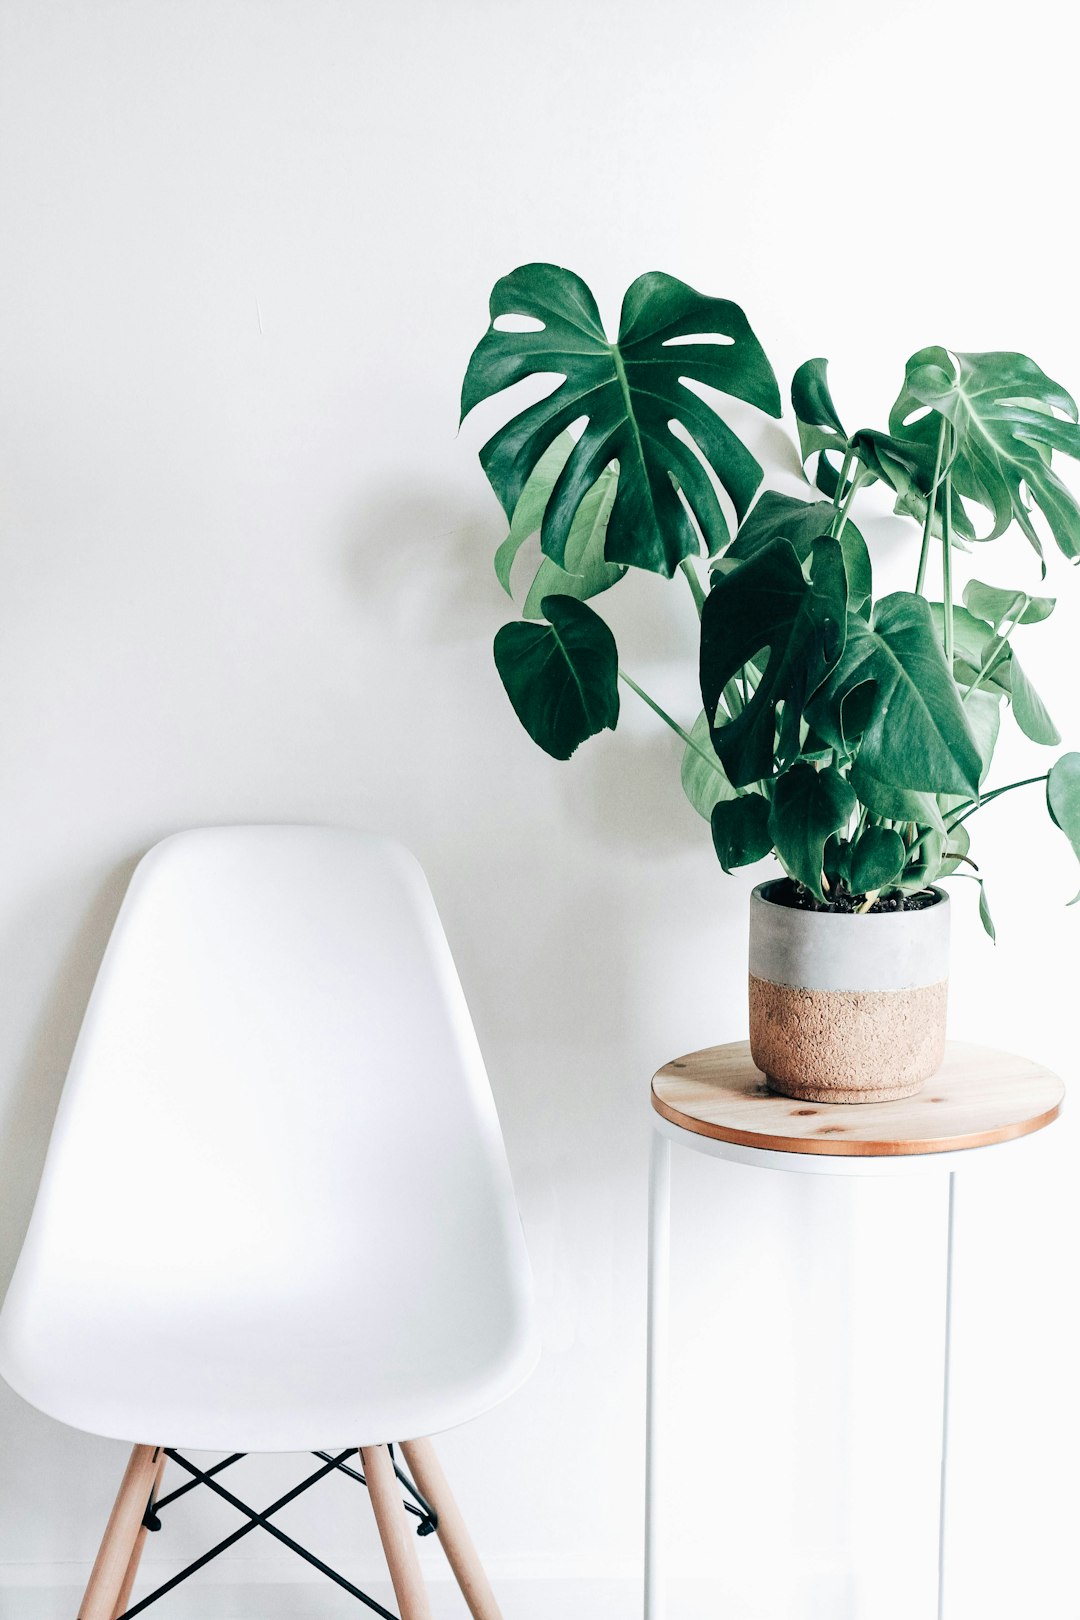 White Eames chair, side table with a potted monstera plant, white wall background, minimalist interior design photography in the style of soft natural lighting, simple and elegant style, high resolution, high quality, high detail, closeup product shot with sharp focus and depth of field.